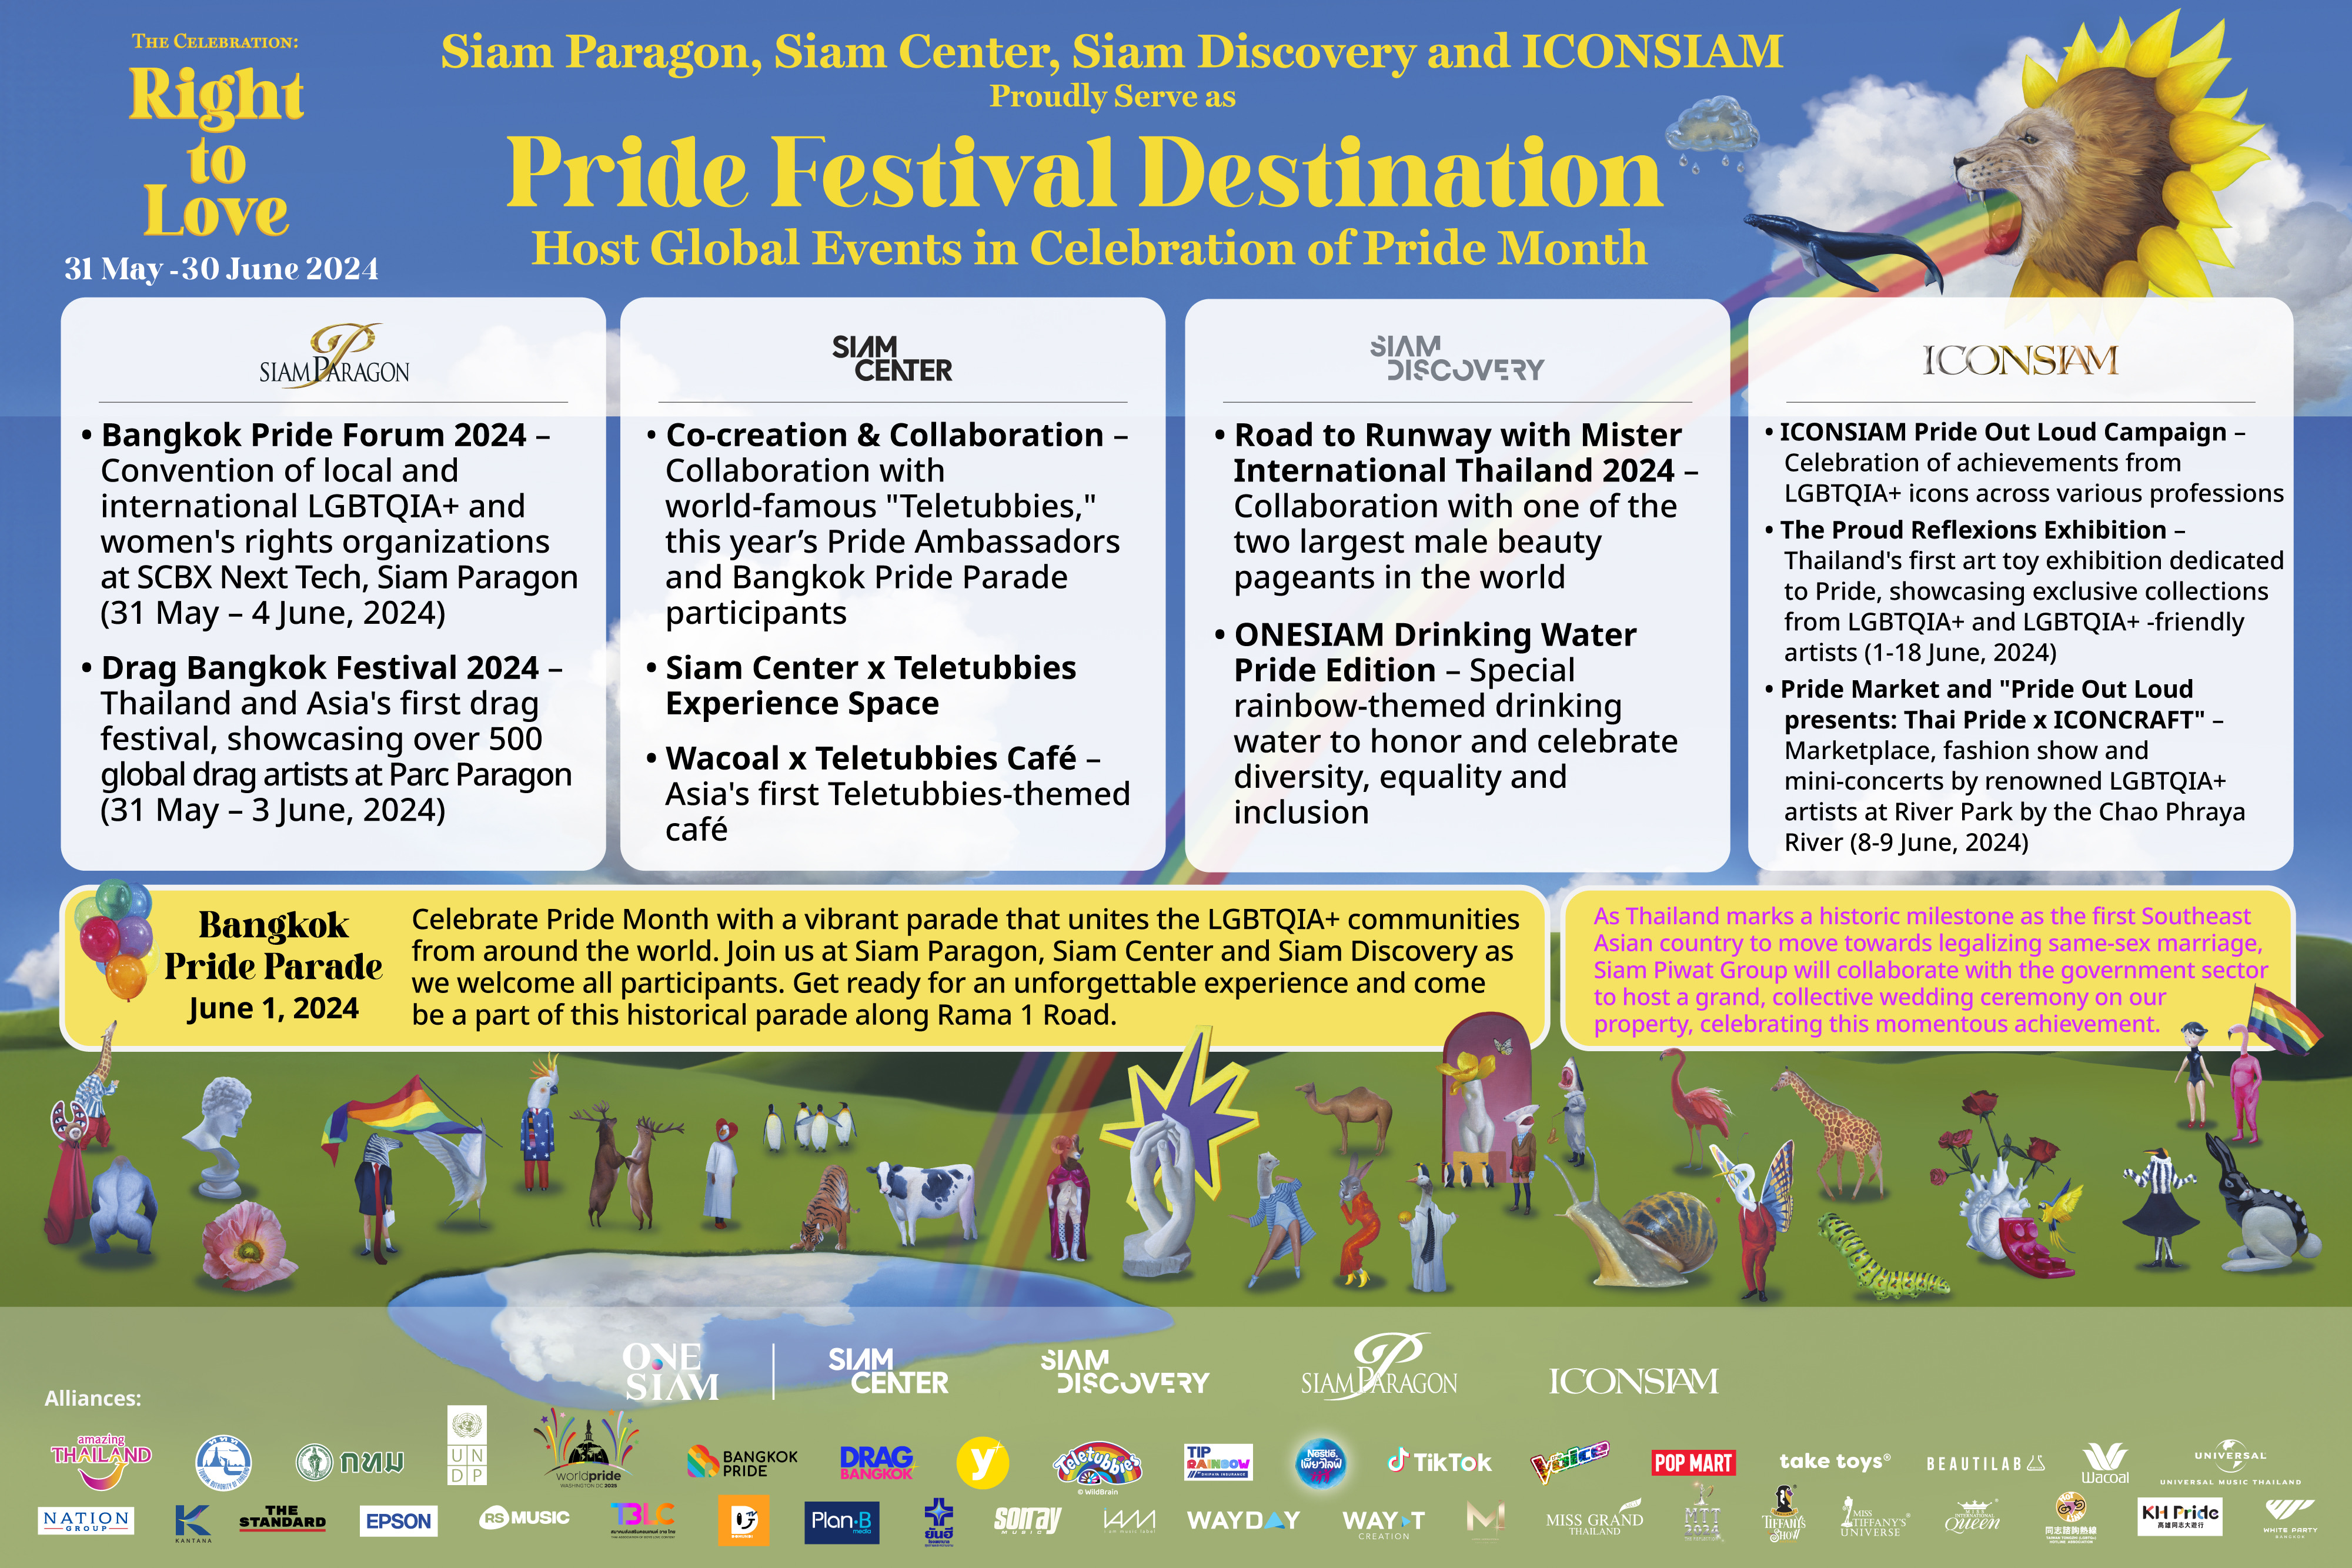 Key Highlights to anticipate during the month-long Pride Celebration across Siam Paragon, Siam Center, Siam Discovery and ICONSIAM